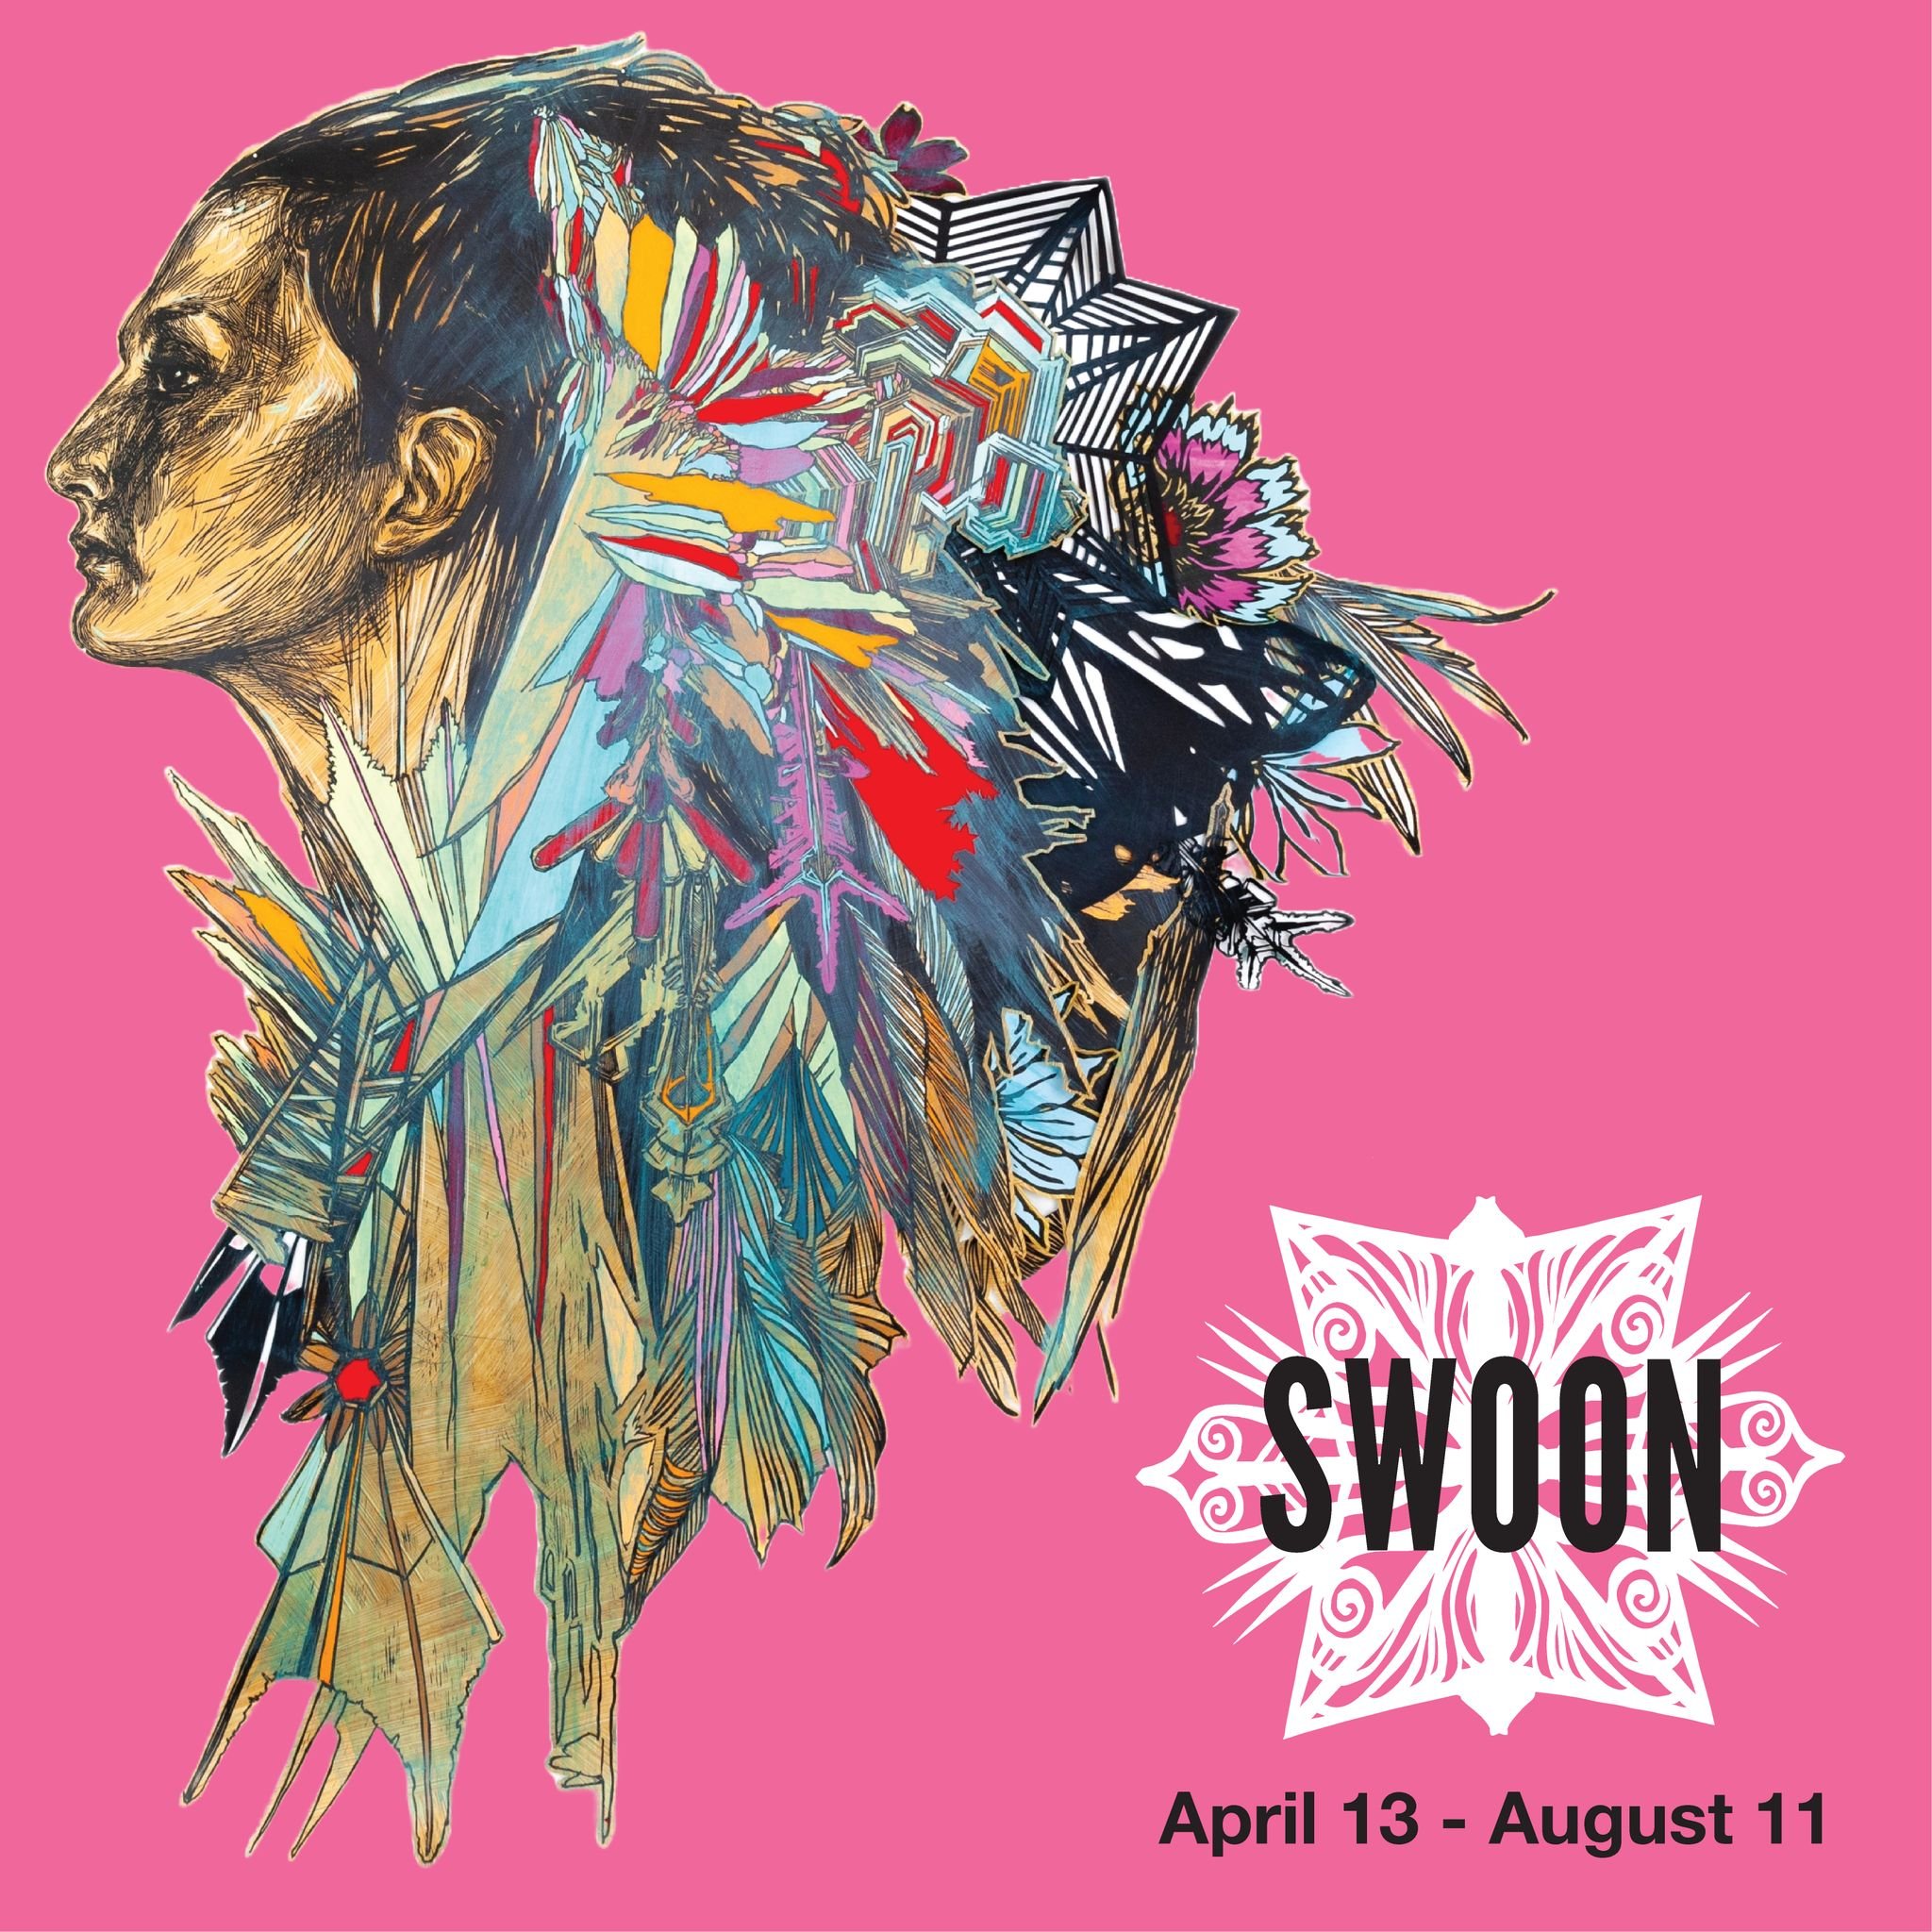 Swoon's Exhibition Reception 
Friday, April 19 at 6:30pm
AMoA Members FREE | Non-Members $10
6:30 PM Cocktails and Hor d&rsquo;oeuvres
7:00 PM Artist Talk by Caledonia Curry
 
Caledonia Curry, whose work appears under the name Swoon, is a Brooklyn-ba